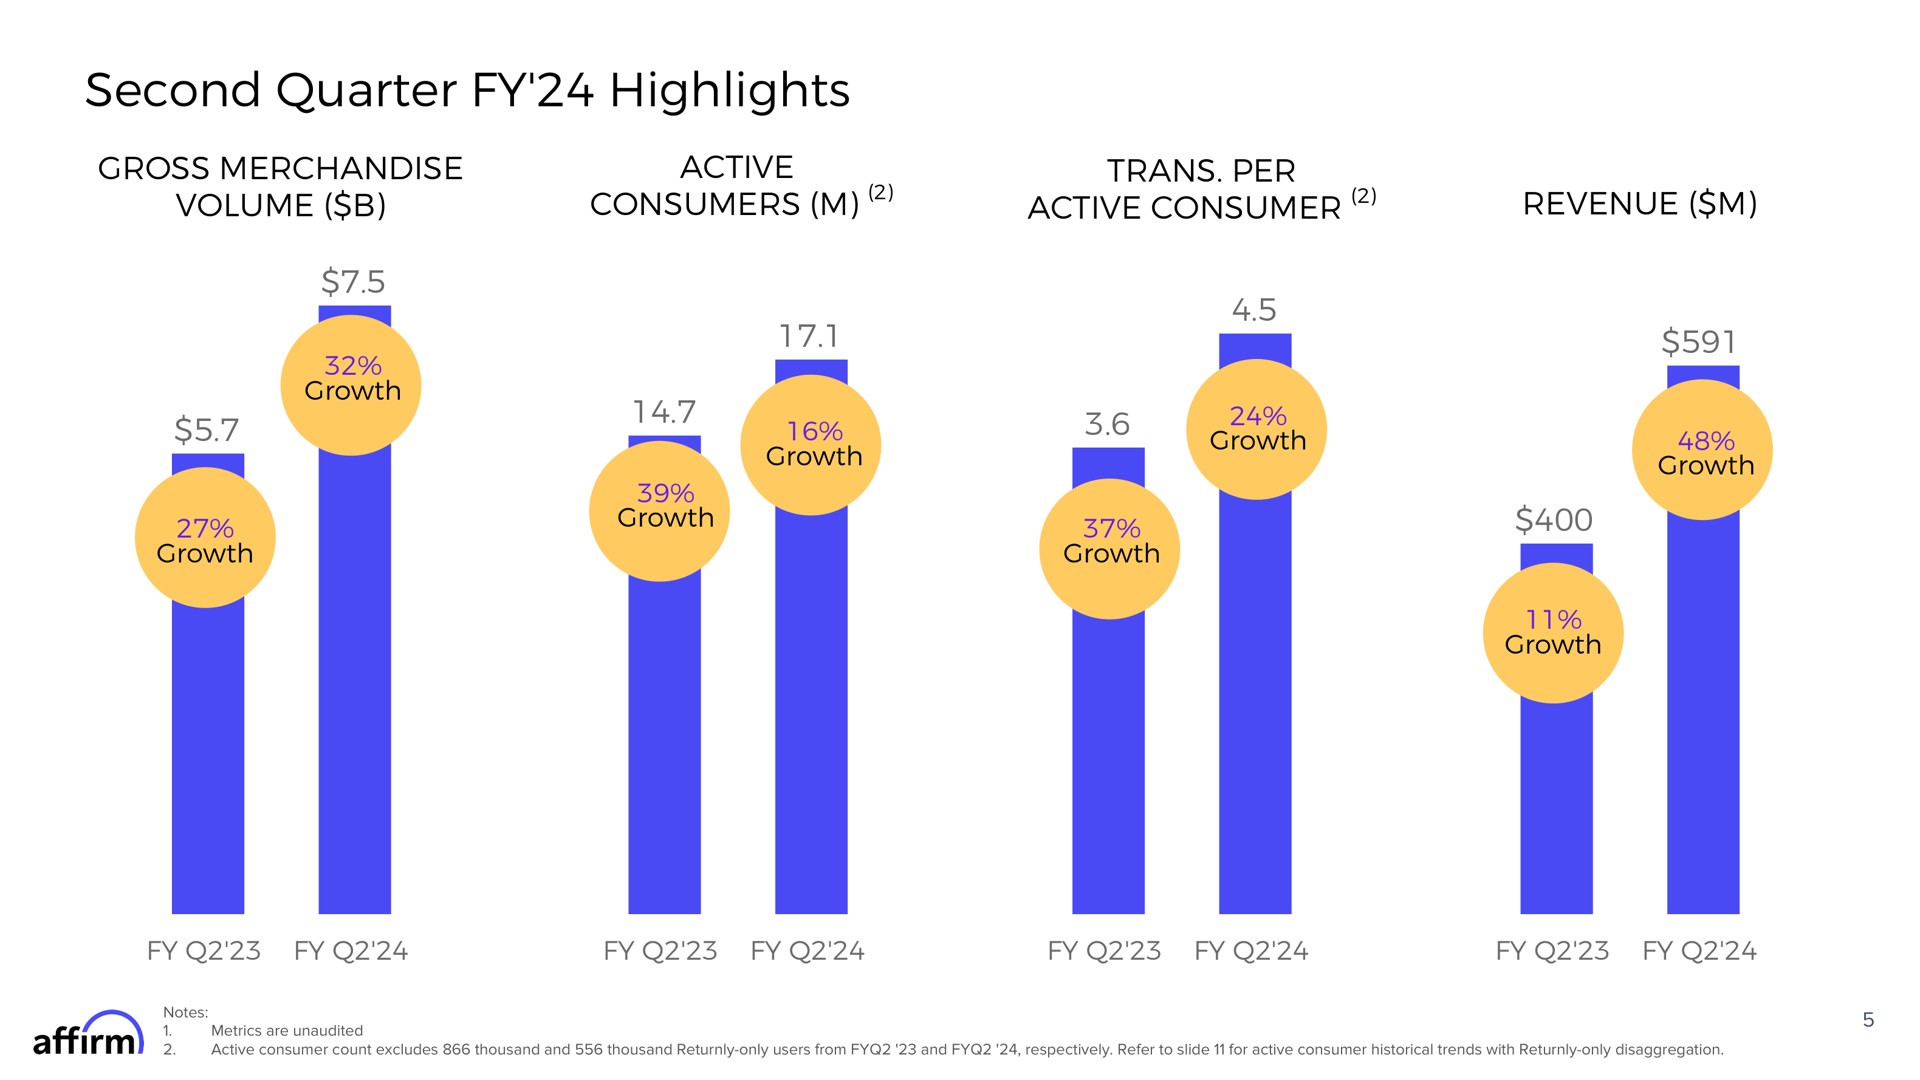 second quarter highlights gross merchandise volume active consumers per active consumer revenue growth as growth | Affirm